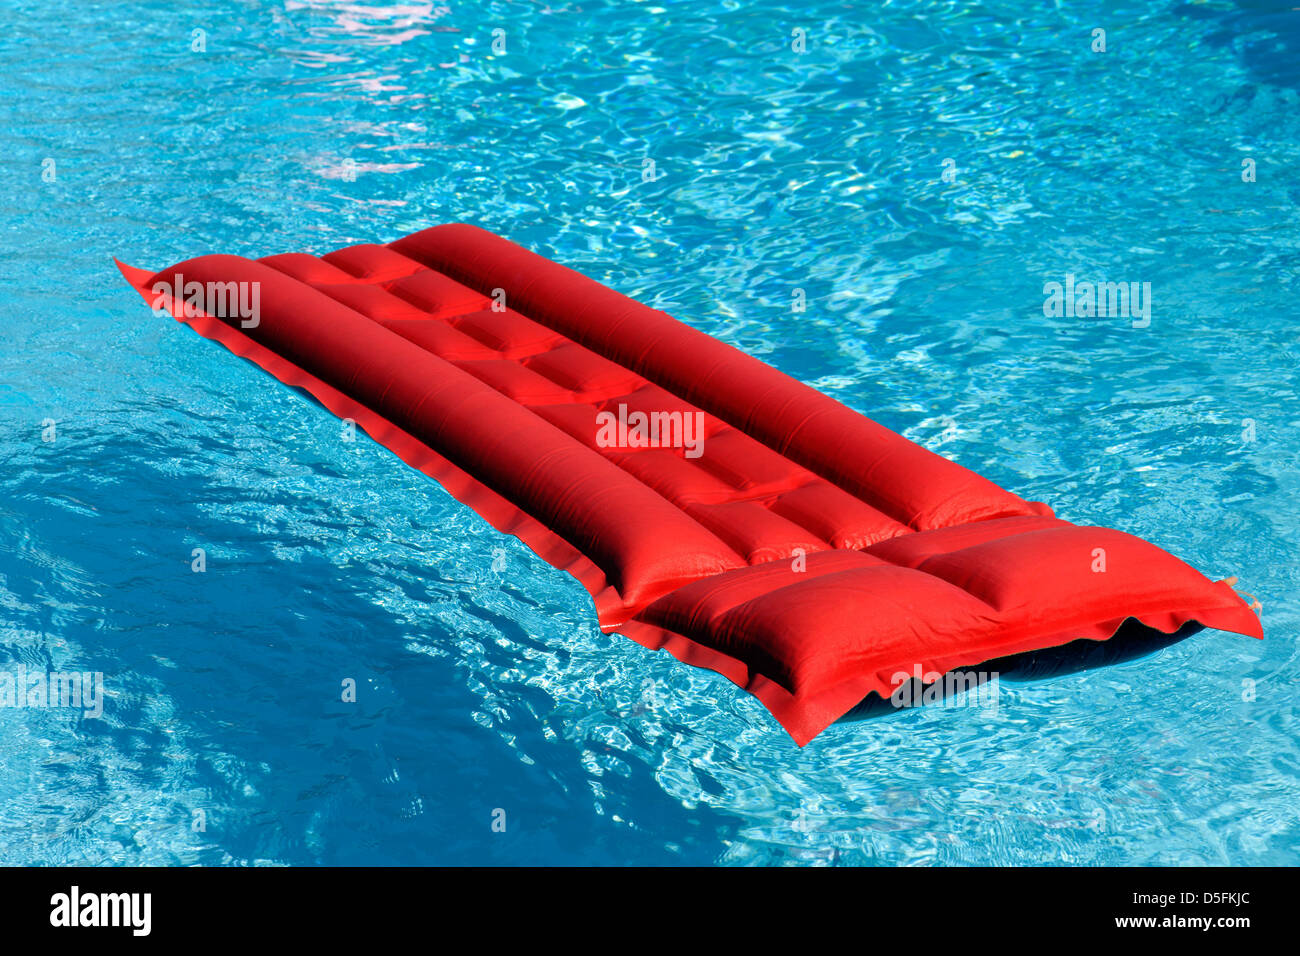 Red airbed floating in swimming pool Stock Photo